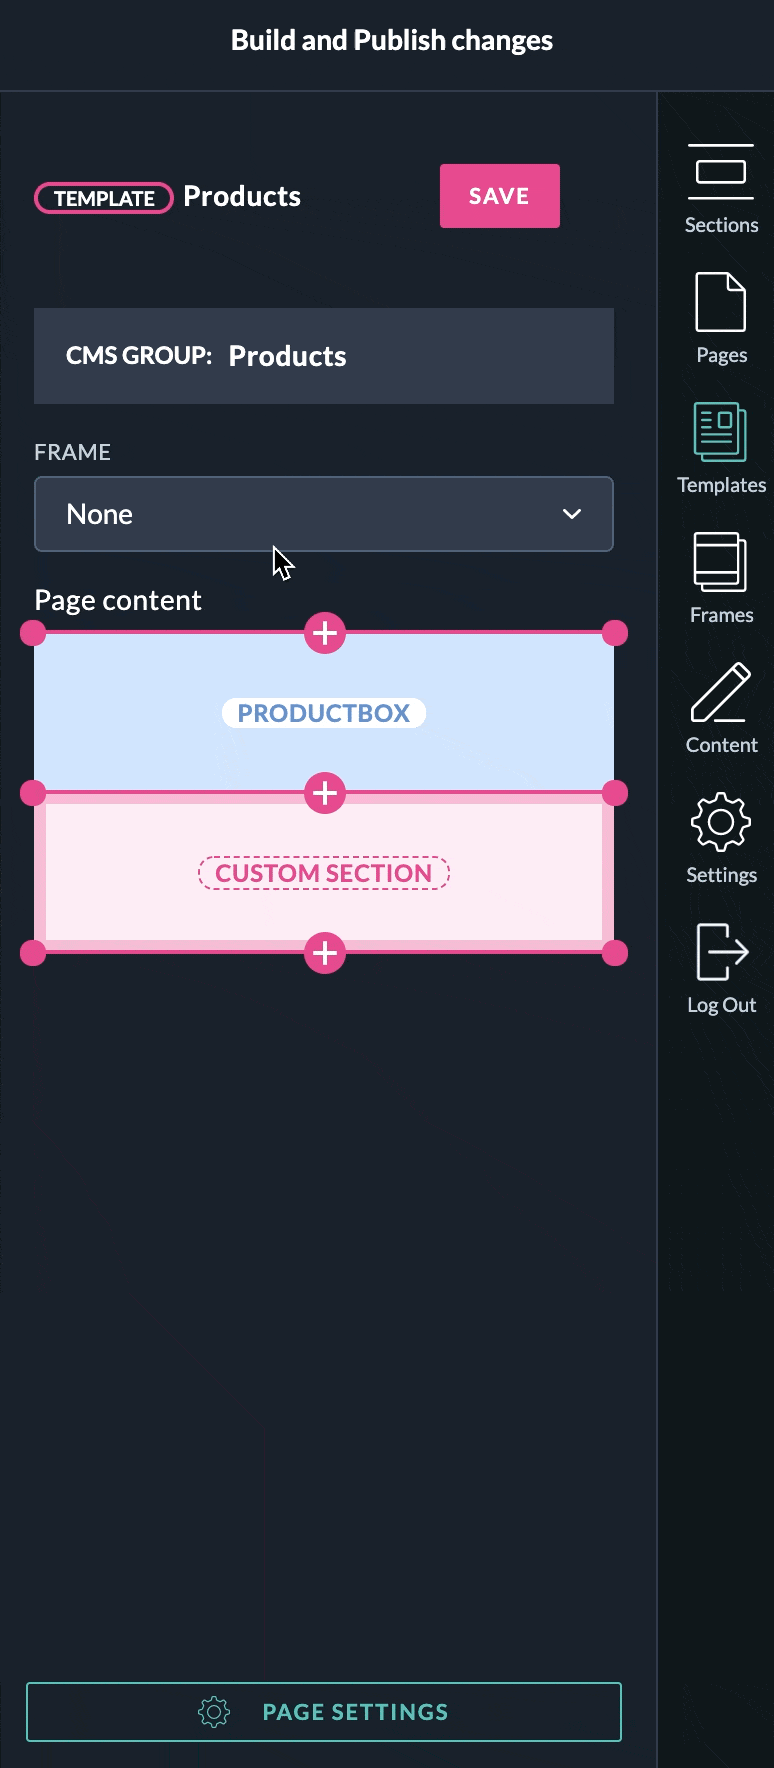 Setting a frame to a template